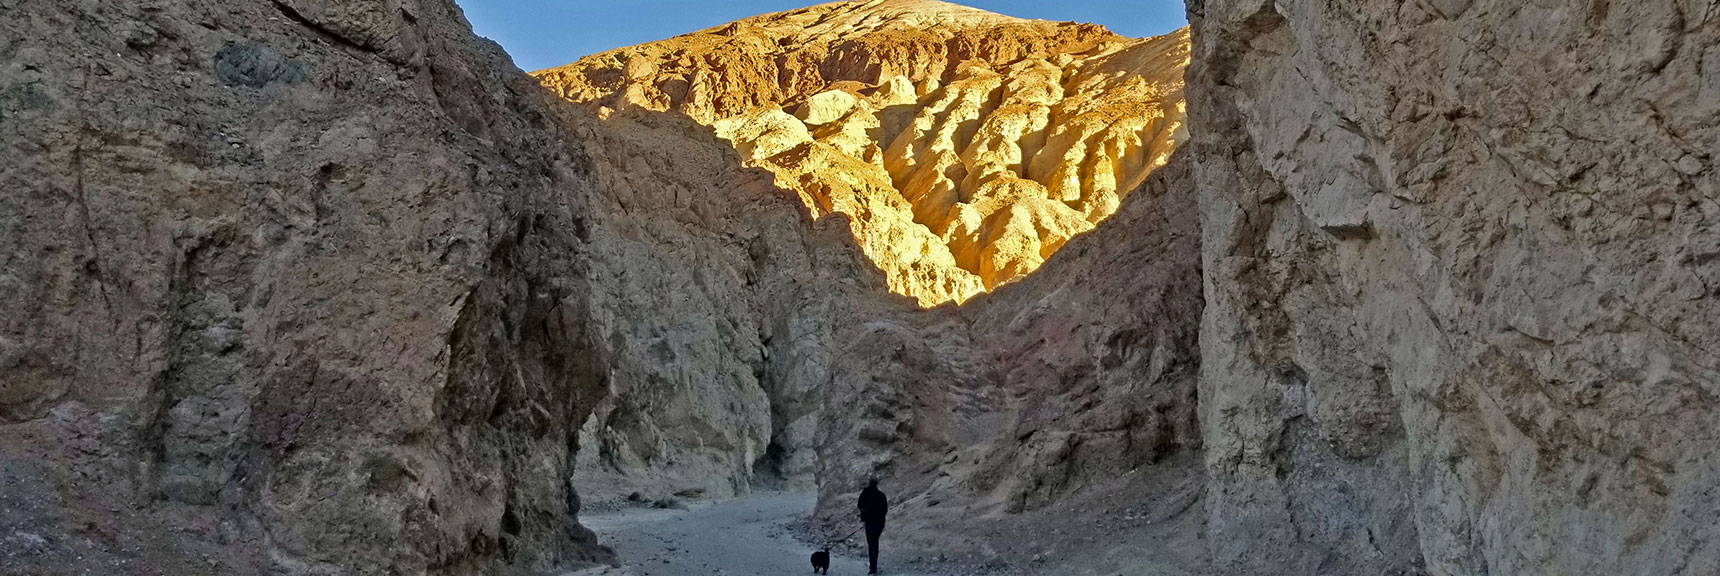 Golden Canyon is Wide, Gradual Incline, Few Obstacles, Easy to Navigate. | Golden Canyon to Zabriskie Point | Death Valley National Park, California